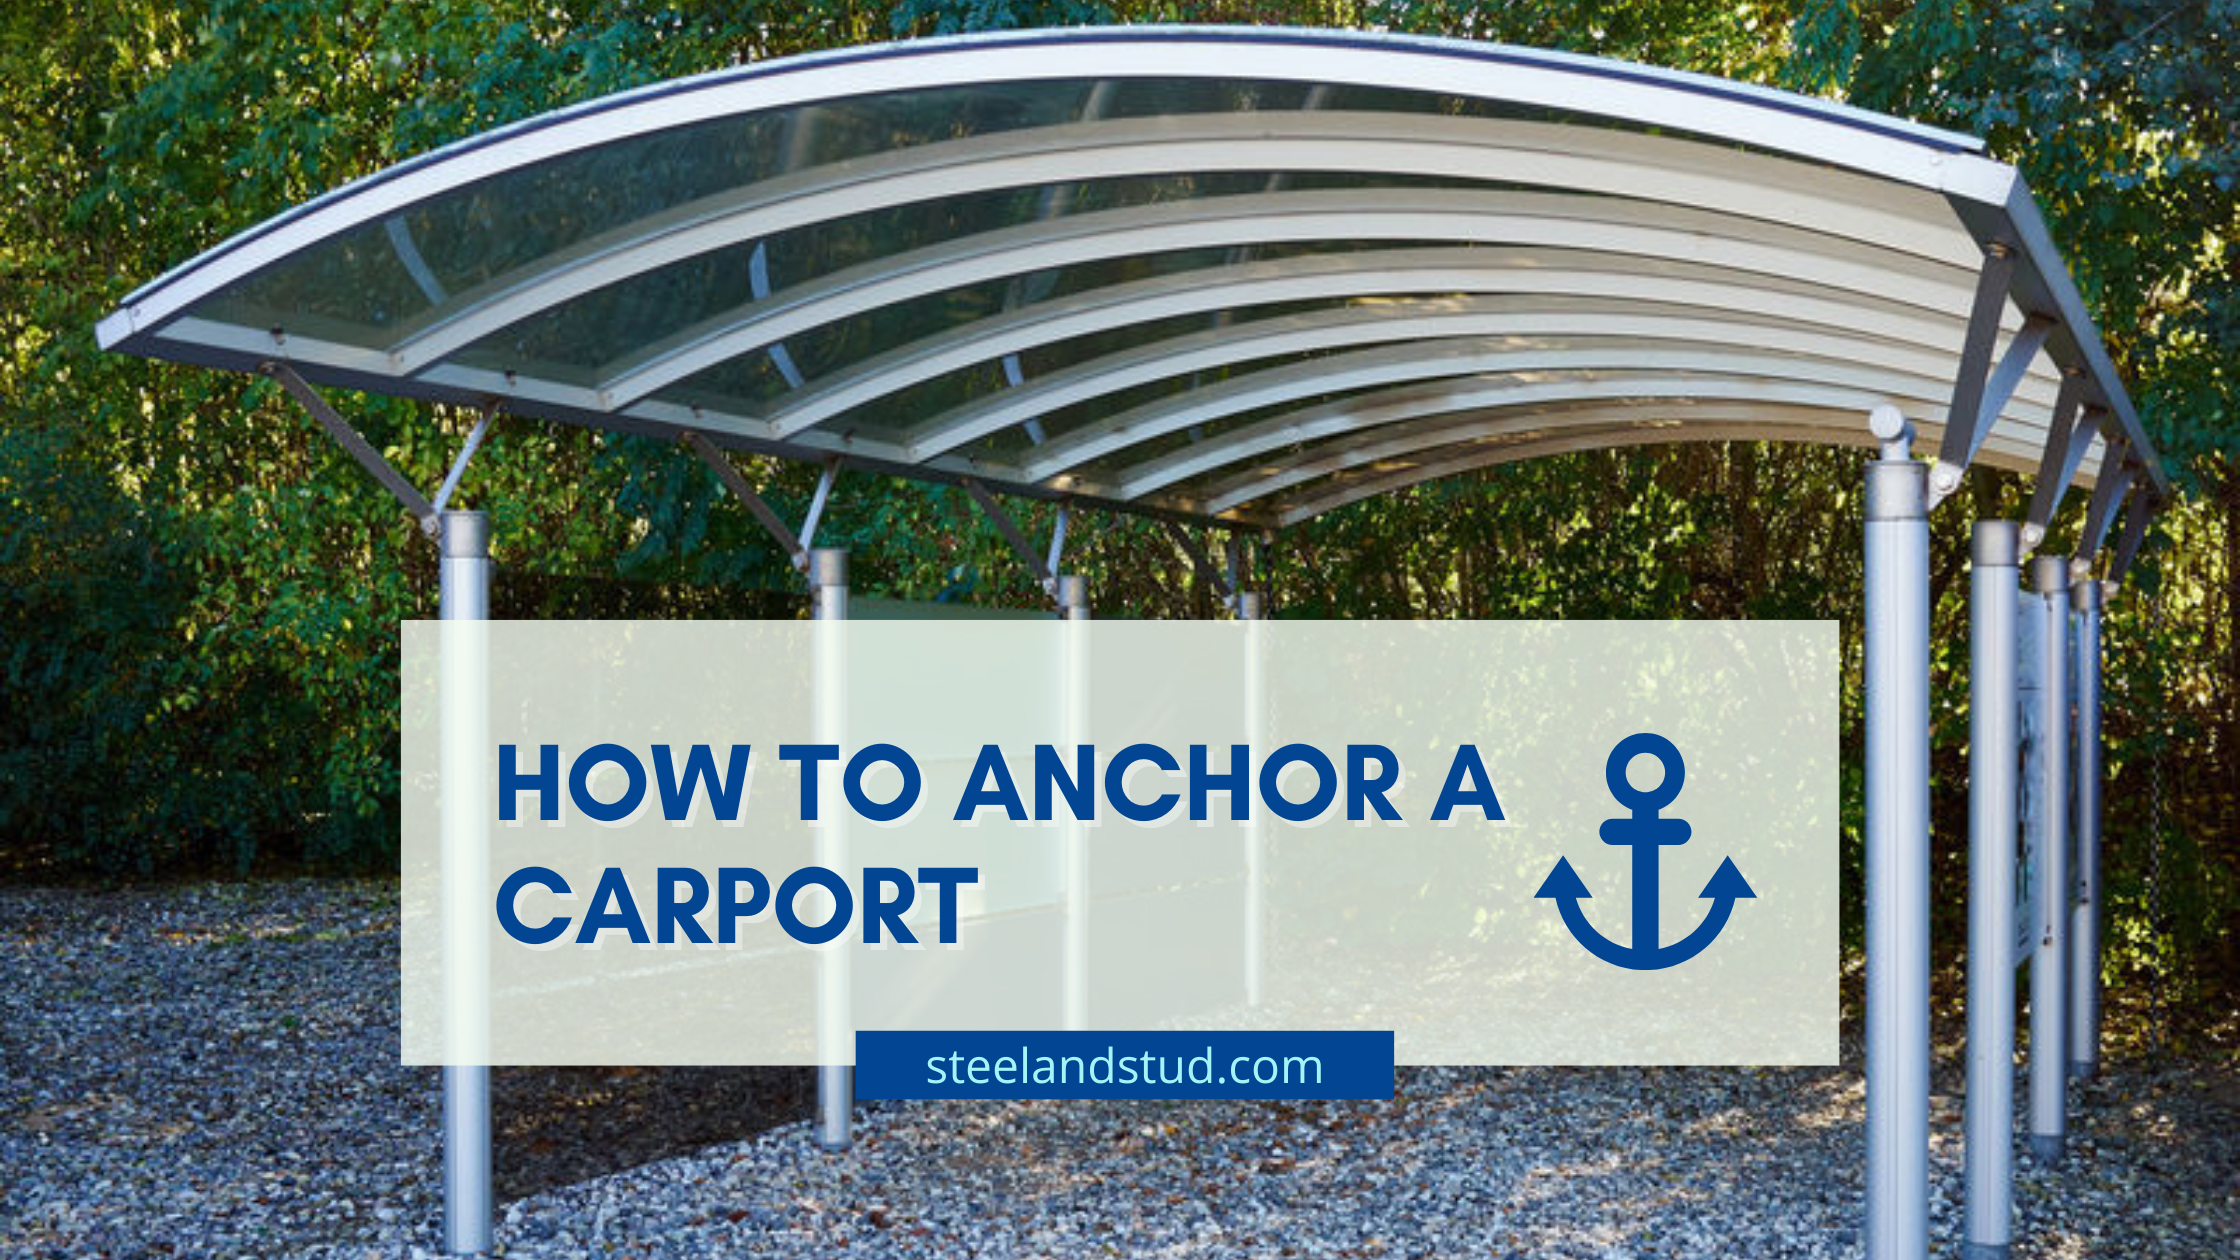 How to anchor a carport?